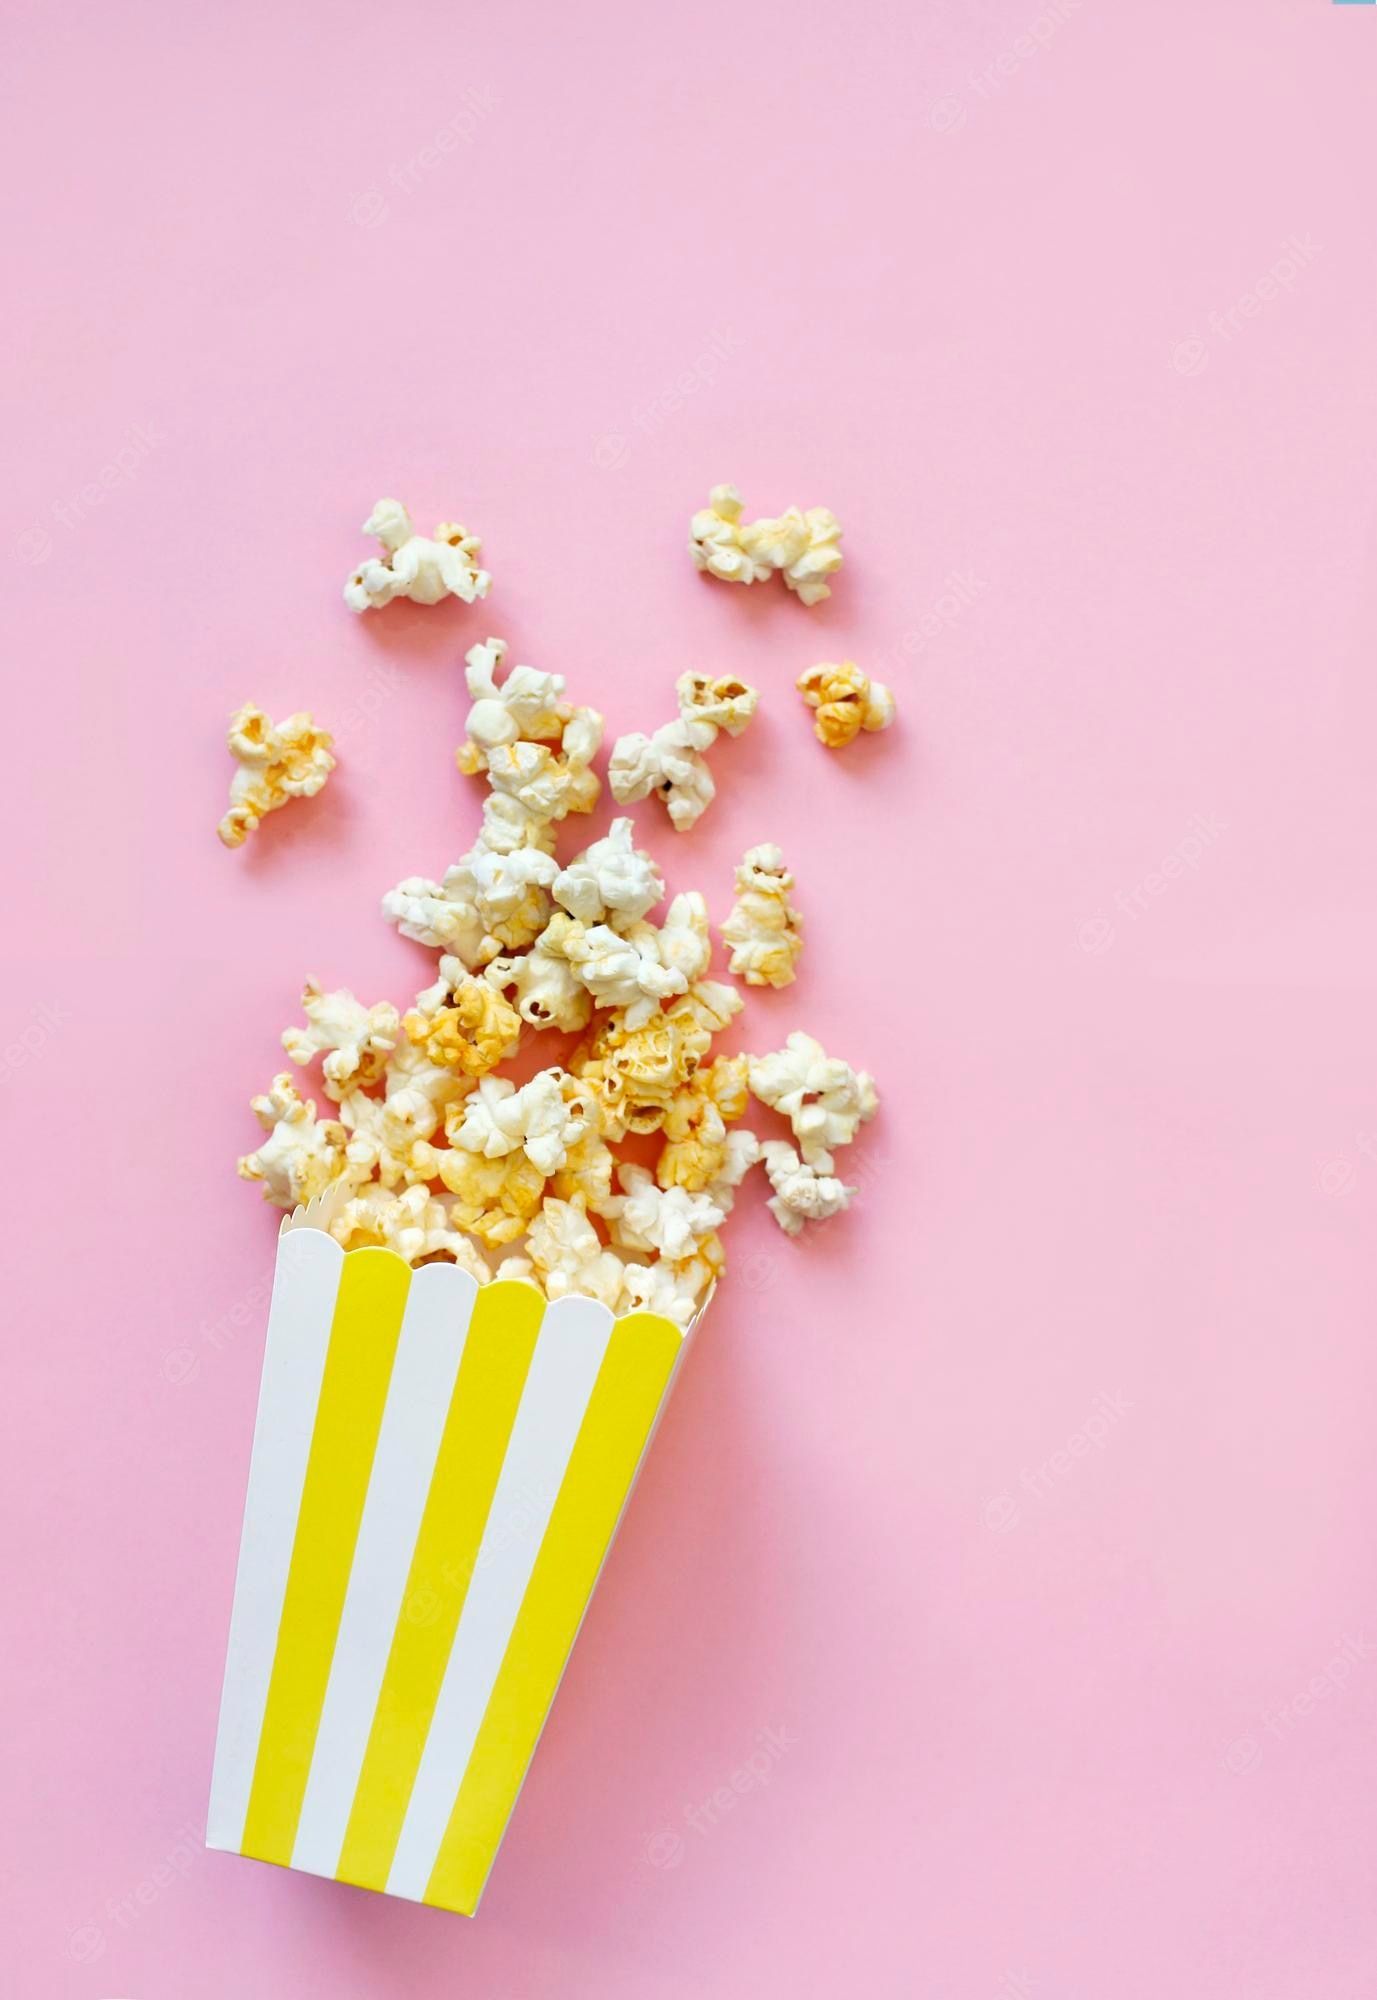 Premium Photo. Spilled popcorn on pink background movie night concept copy space for text